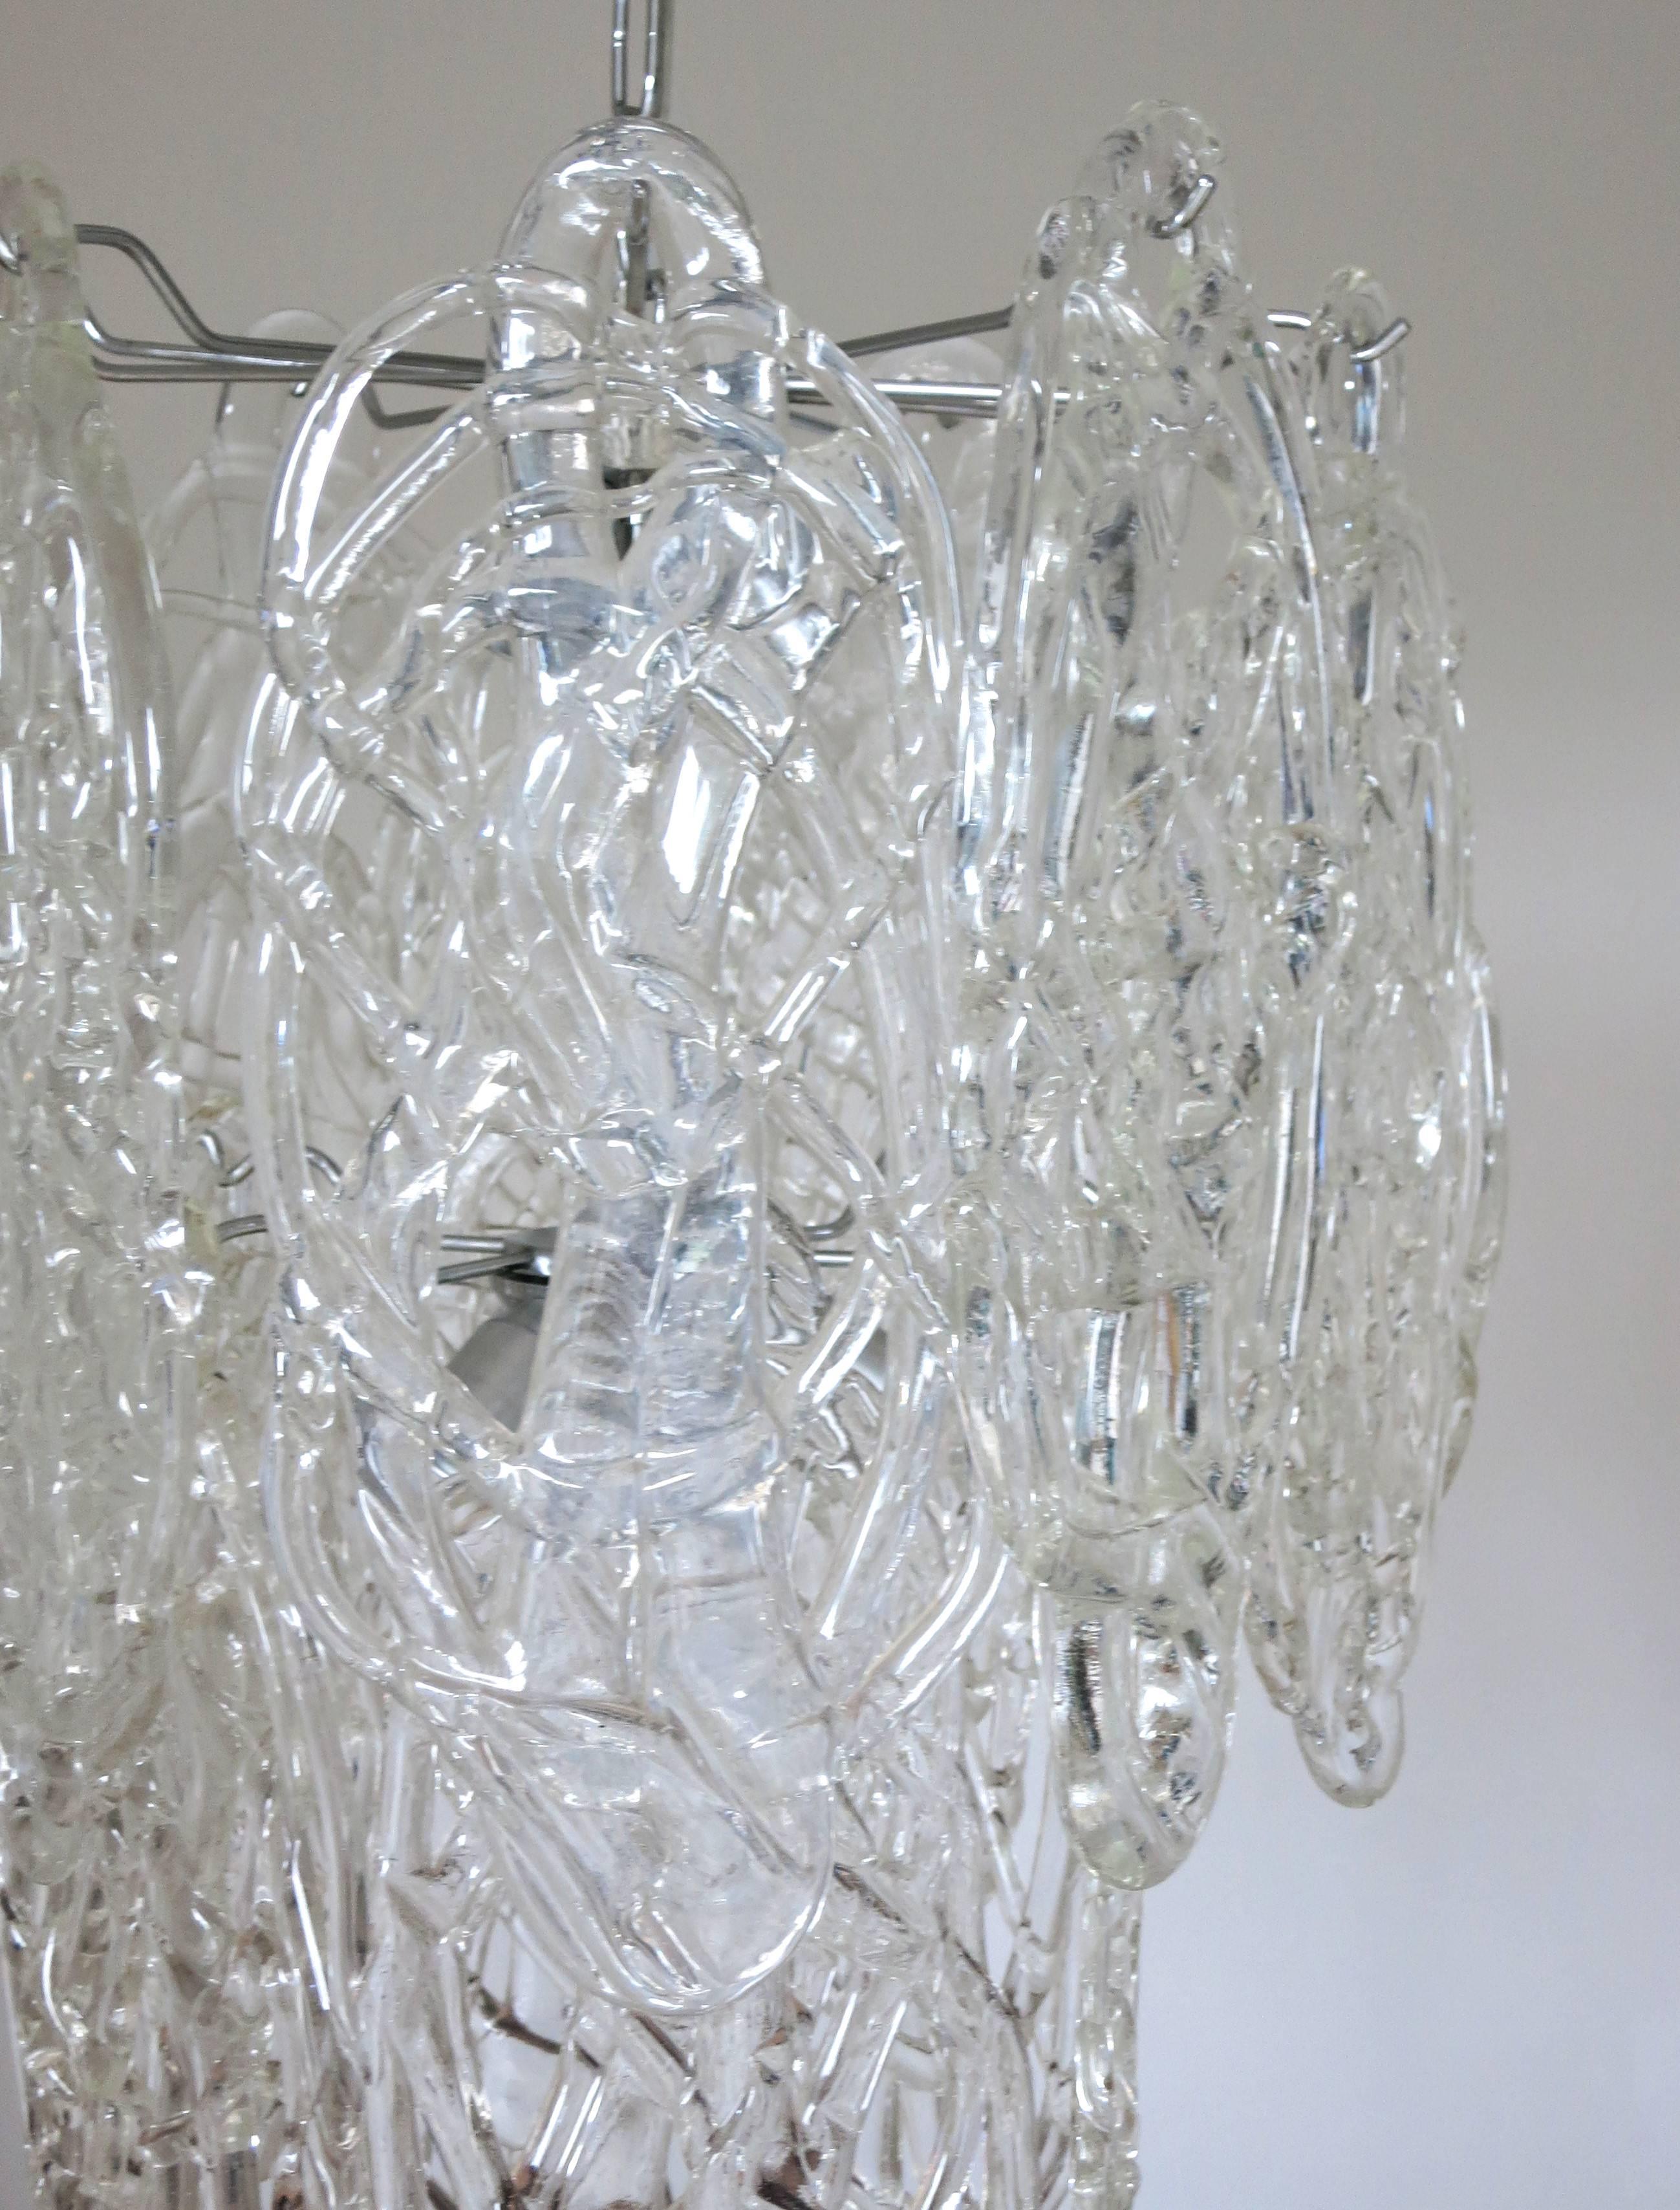 Original vintage Italian chandelier with clear Murano glass blown in intricate cobweb-like pattern, mounted on chrome metal frame / Designed by Vistosi circa 1960’s / Made in Italy 
7 lights / E12 or E14 type / max 40W each
Diameter: 16 inches /